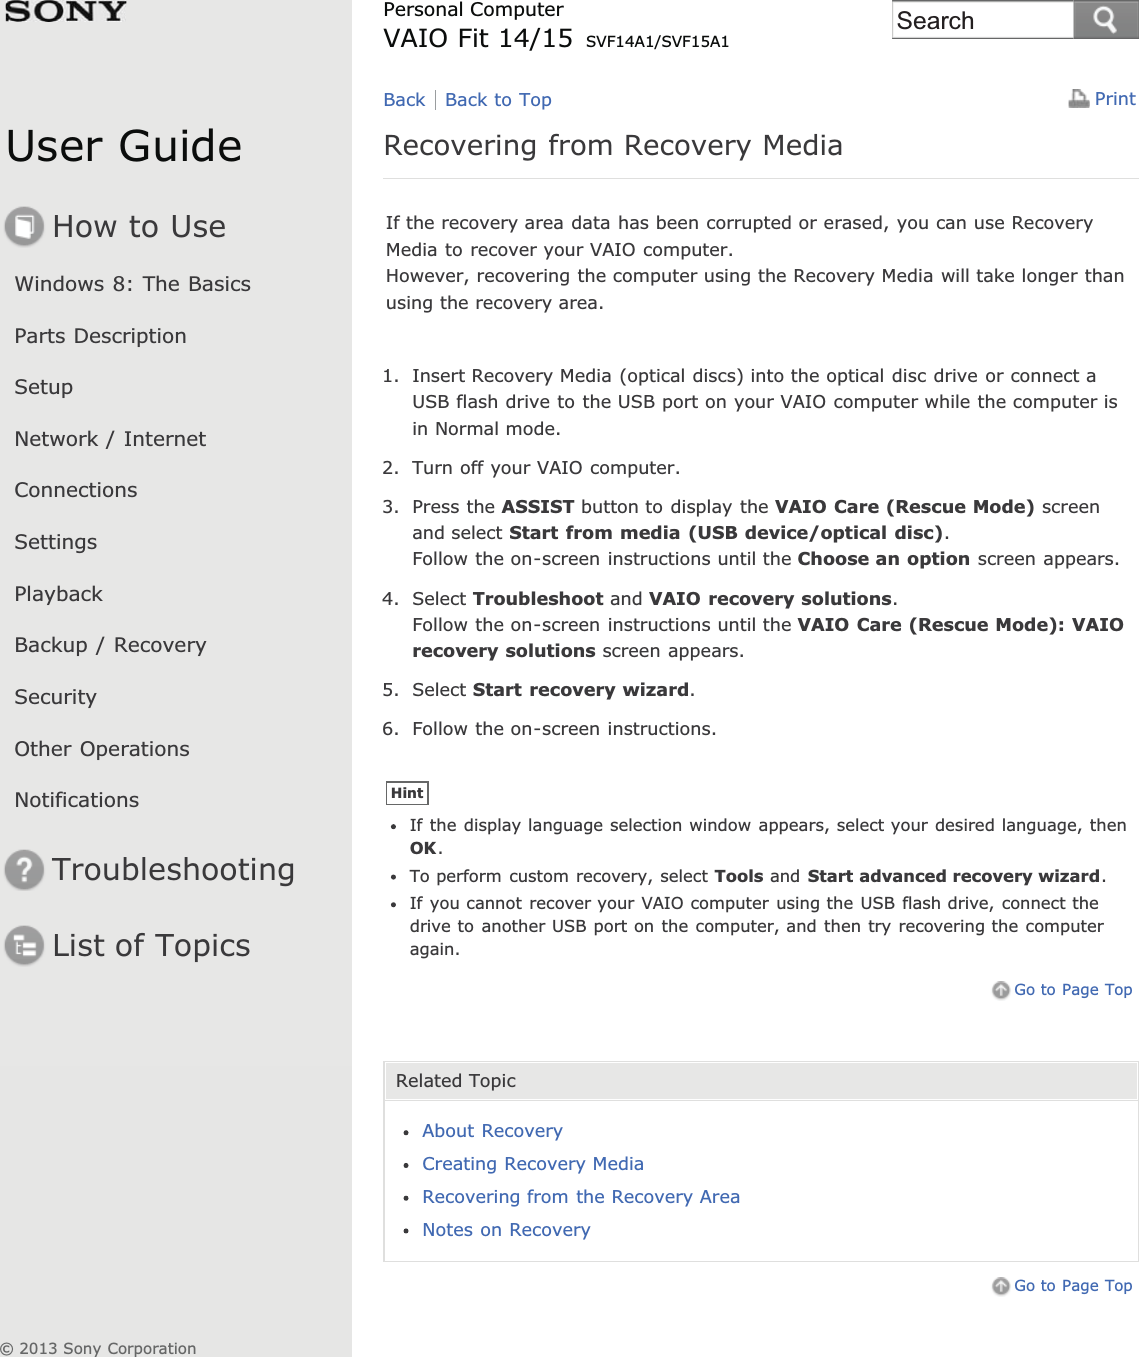 User GuideHow to UseWindows 8: The BasicsParts DescriptionSetupNetwork / InternetConnectionsSettingsPlaybackBackup / RecoverySecurityOther OperationsNotificationsTroubleshootingList of TopicsPrintPersonal ComputerVAIO Fit 14/15 SVF14A1/SVF15A1Recovering from Recovery MediaIf the recovery area data has been corrupted or erased, you can use RecoveryMedia to recover your VAIO computer.However, recovering the computer using the Recovery Media will take longer thanusing the recovery area.1. Insert Recovery Media (optical discs) into the optical disc drive or connect aUSB flash drive to the USB port on your VAIO computer while the computer isin Normal mode.2. Turn off your VAIO computer.3. Press the ASSIST button to display the VAIO Care (Rescue Mode) screenand select Start from media (USB device/optical disc).Follow the on-screen instructions until the Choose an option screen appears.4. Select Troubleshoot and VAIO recovery solutions.Follow the on-screen instructions until the VAIO Care (Rescue Mode): VAIOrecovery solutions screen appears.5. Select Start recovery wizard.6. Follow the on-screen instructions.HintIf the display language selection window appears, select your desired language, thenOK.To perform custom recovery, select Tools and Start advanced recovery wizard.If you cannot recover your VAIO computer using the USB flash drive, connect thedrive to another USB port on the computer, and then try recovering the computeragain.Go to Page TopRelated TopicAbout RecoveryCreating Recovery MediaRecovering from the Recovery AreaNotes on RecoveryGo to Page TopBack Back to Top© 2013 Sony CorporationSearch